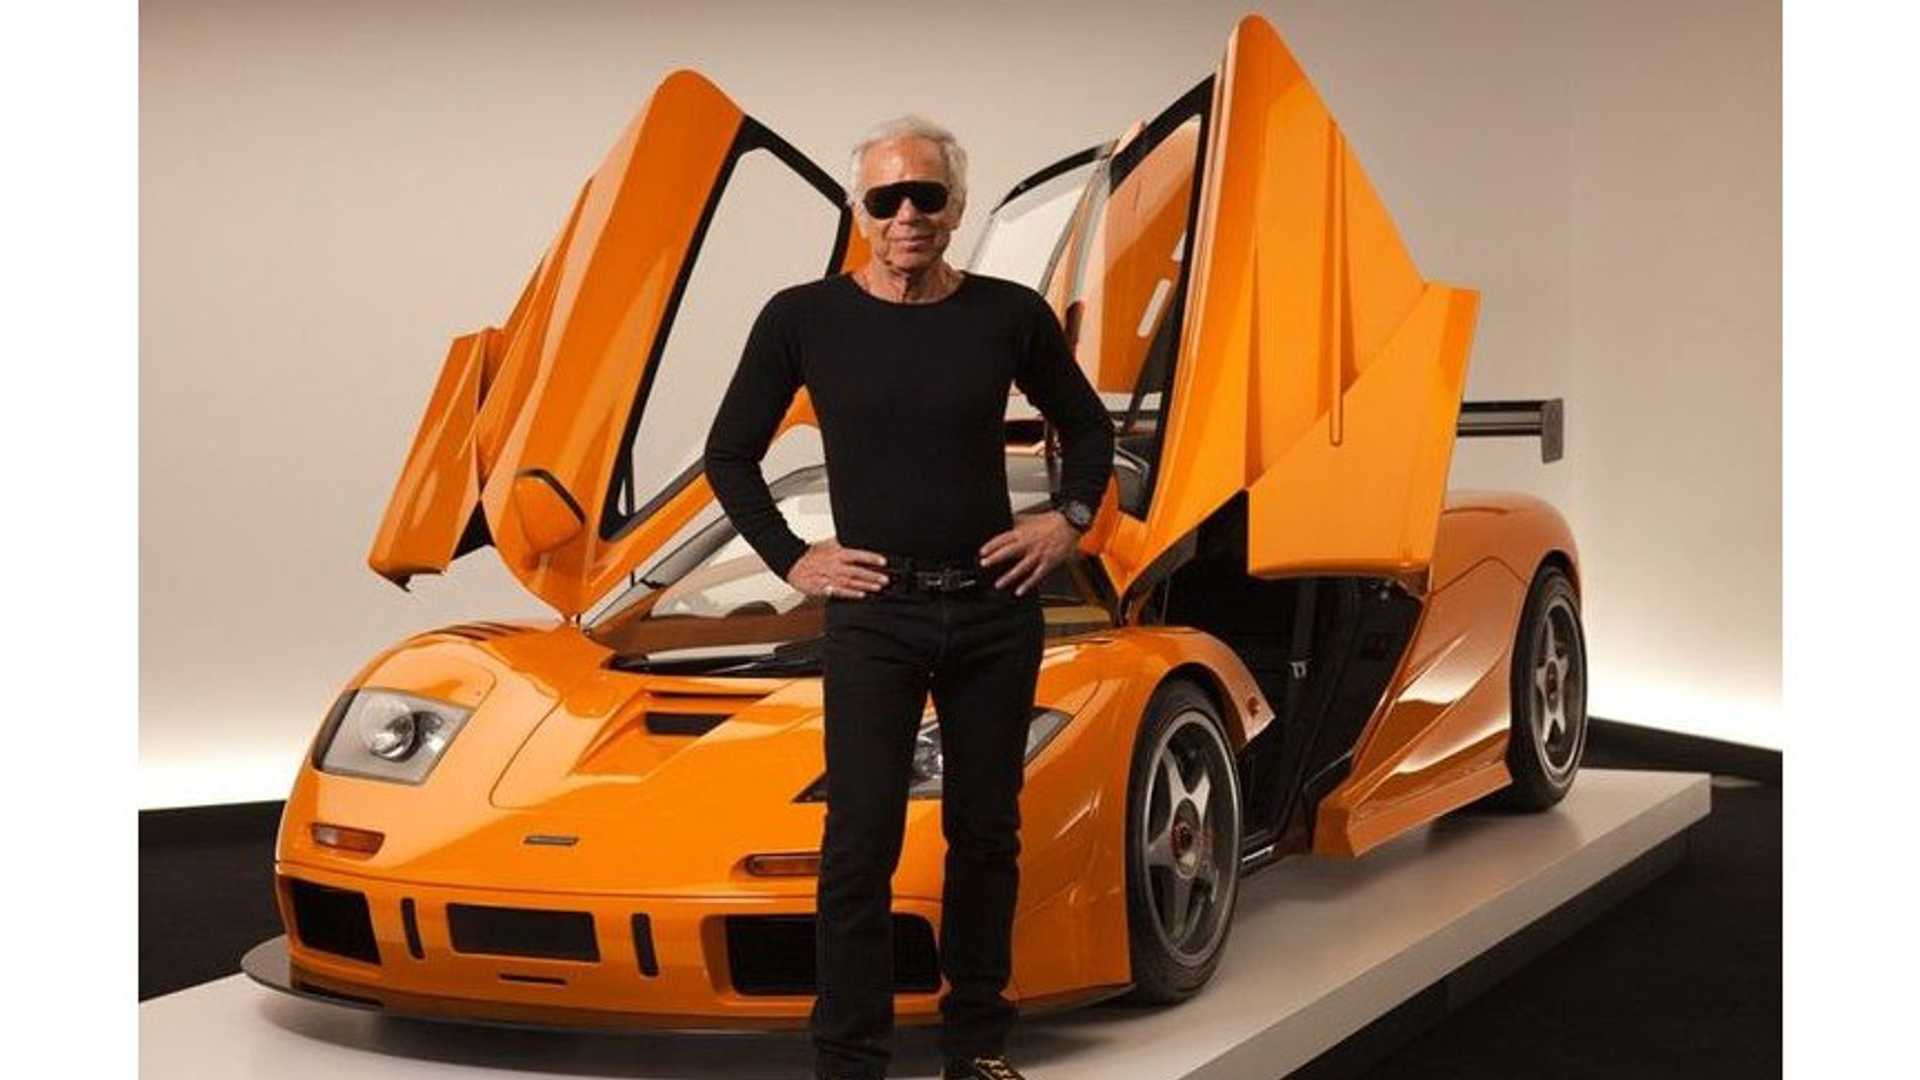 Take A Look At Ralph Lauren's Jaw-Dropping Car Collection